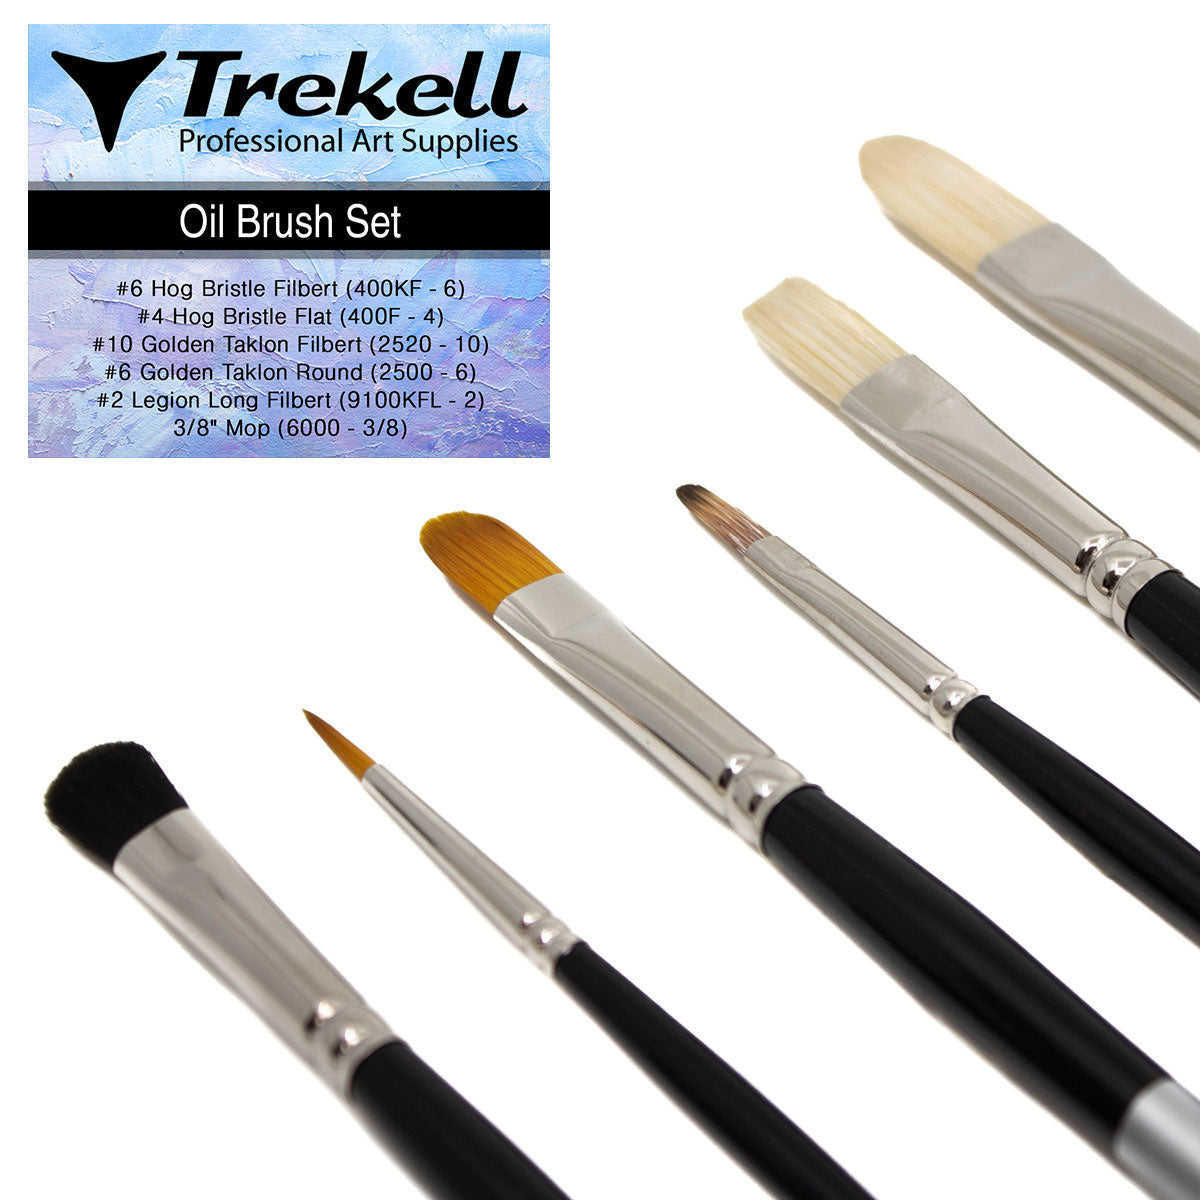 Trekell Art Supplies Oil Artist Brush Set for beginners, intermediate, advanced, professional artists, synthetic and natural hair long handle short handle